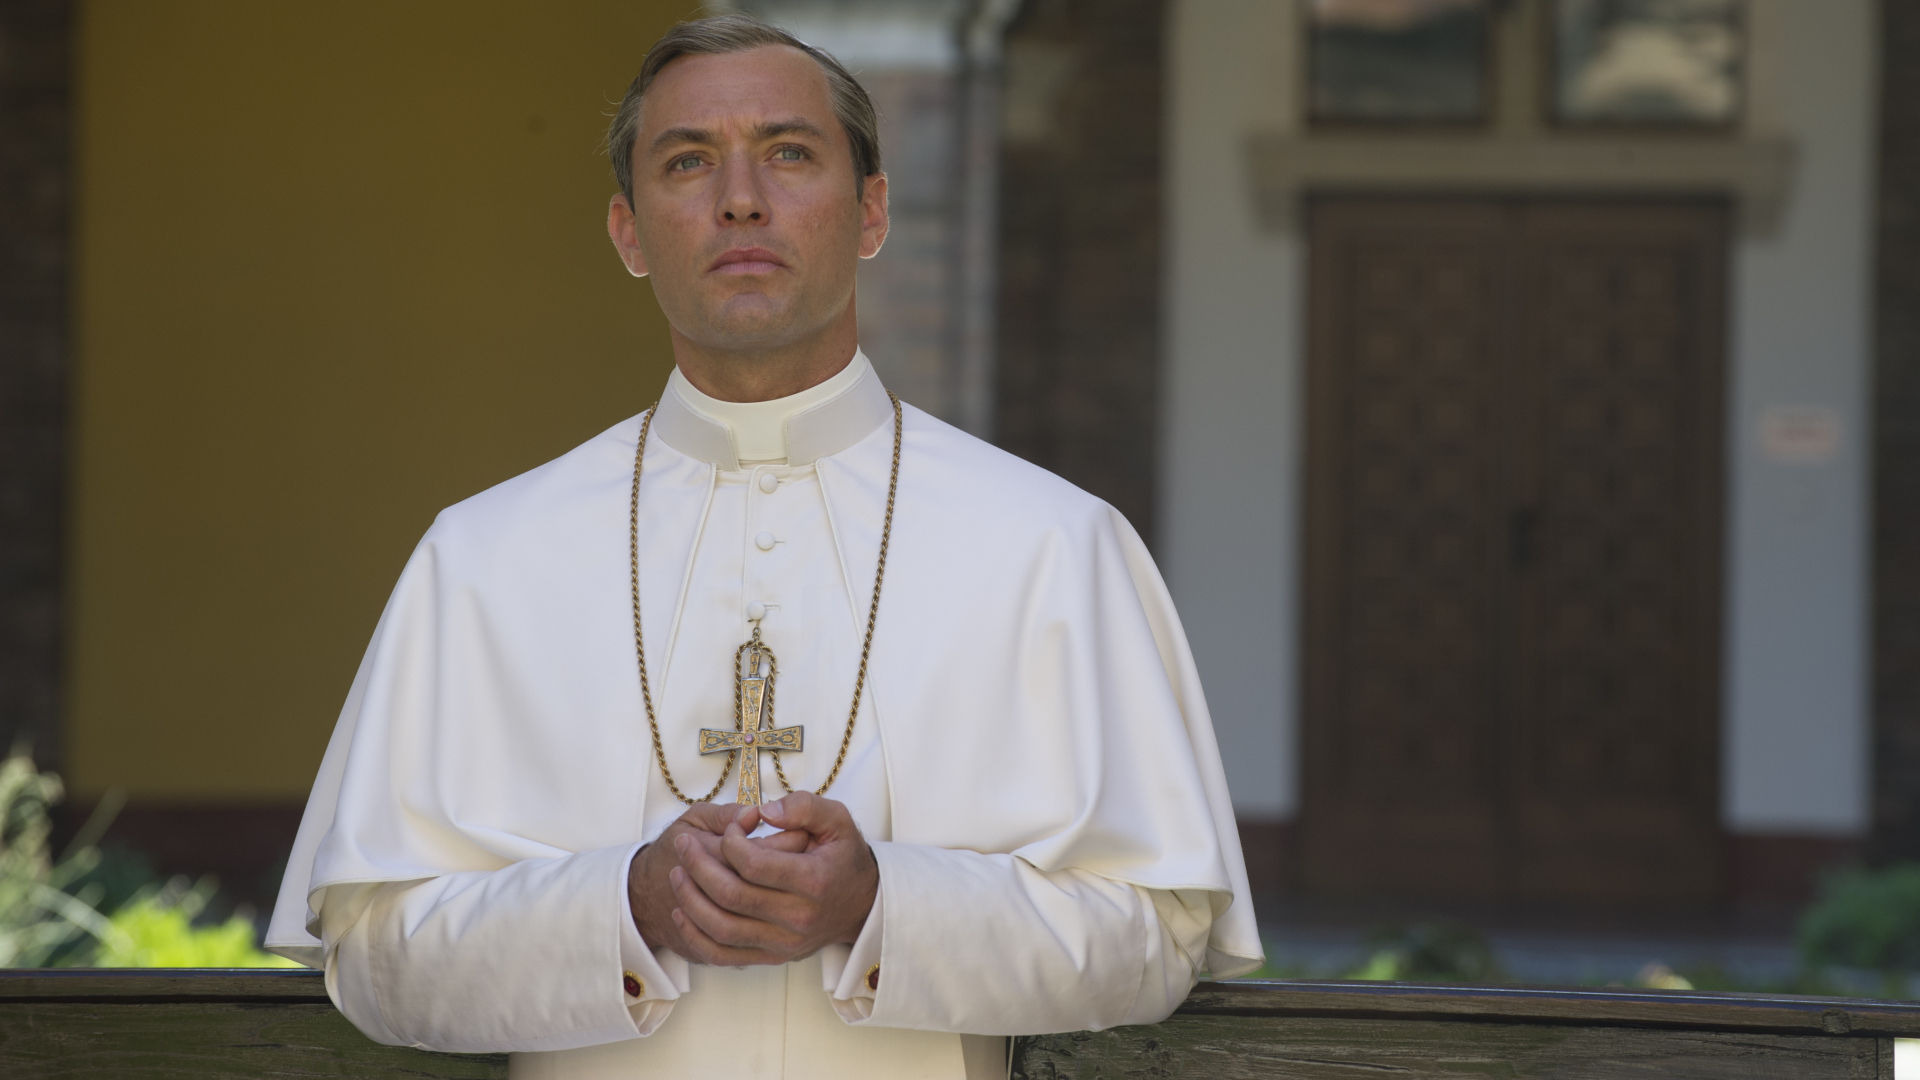 The Young Pope — s01e03 — Episode 3